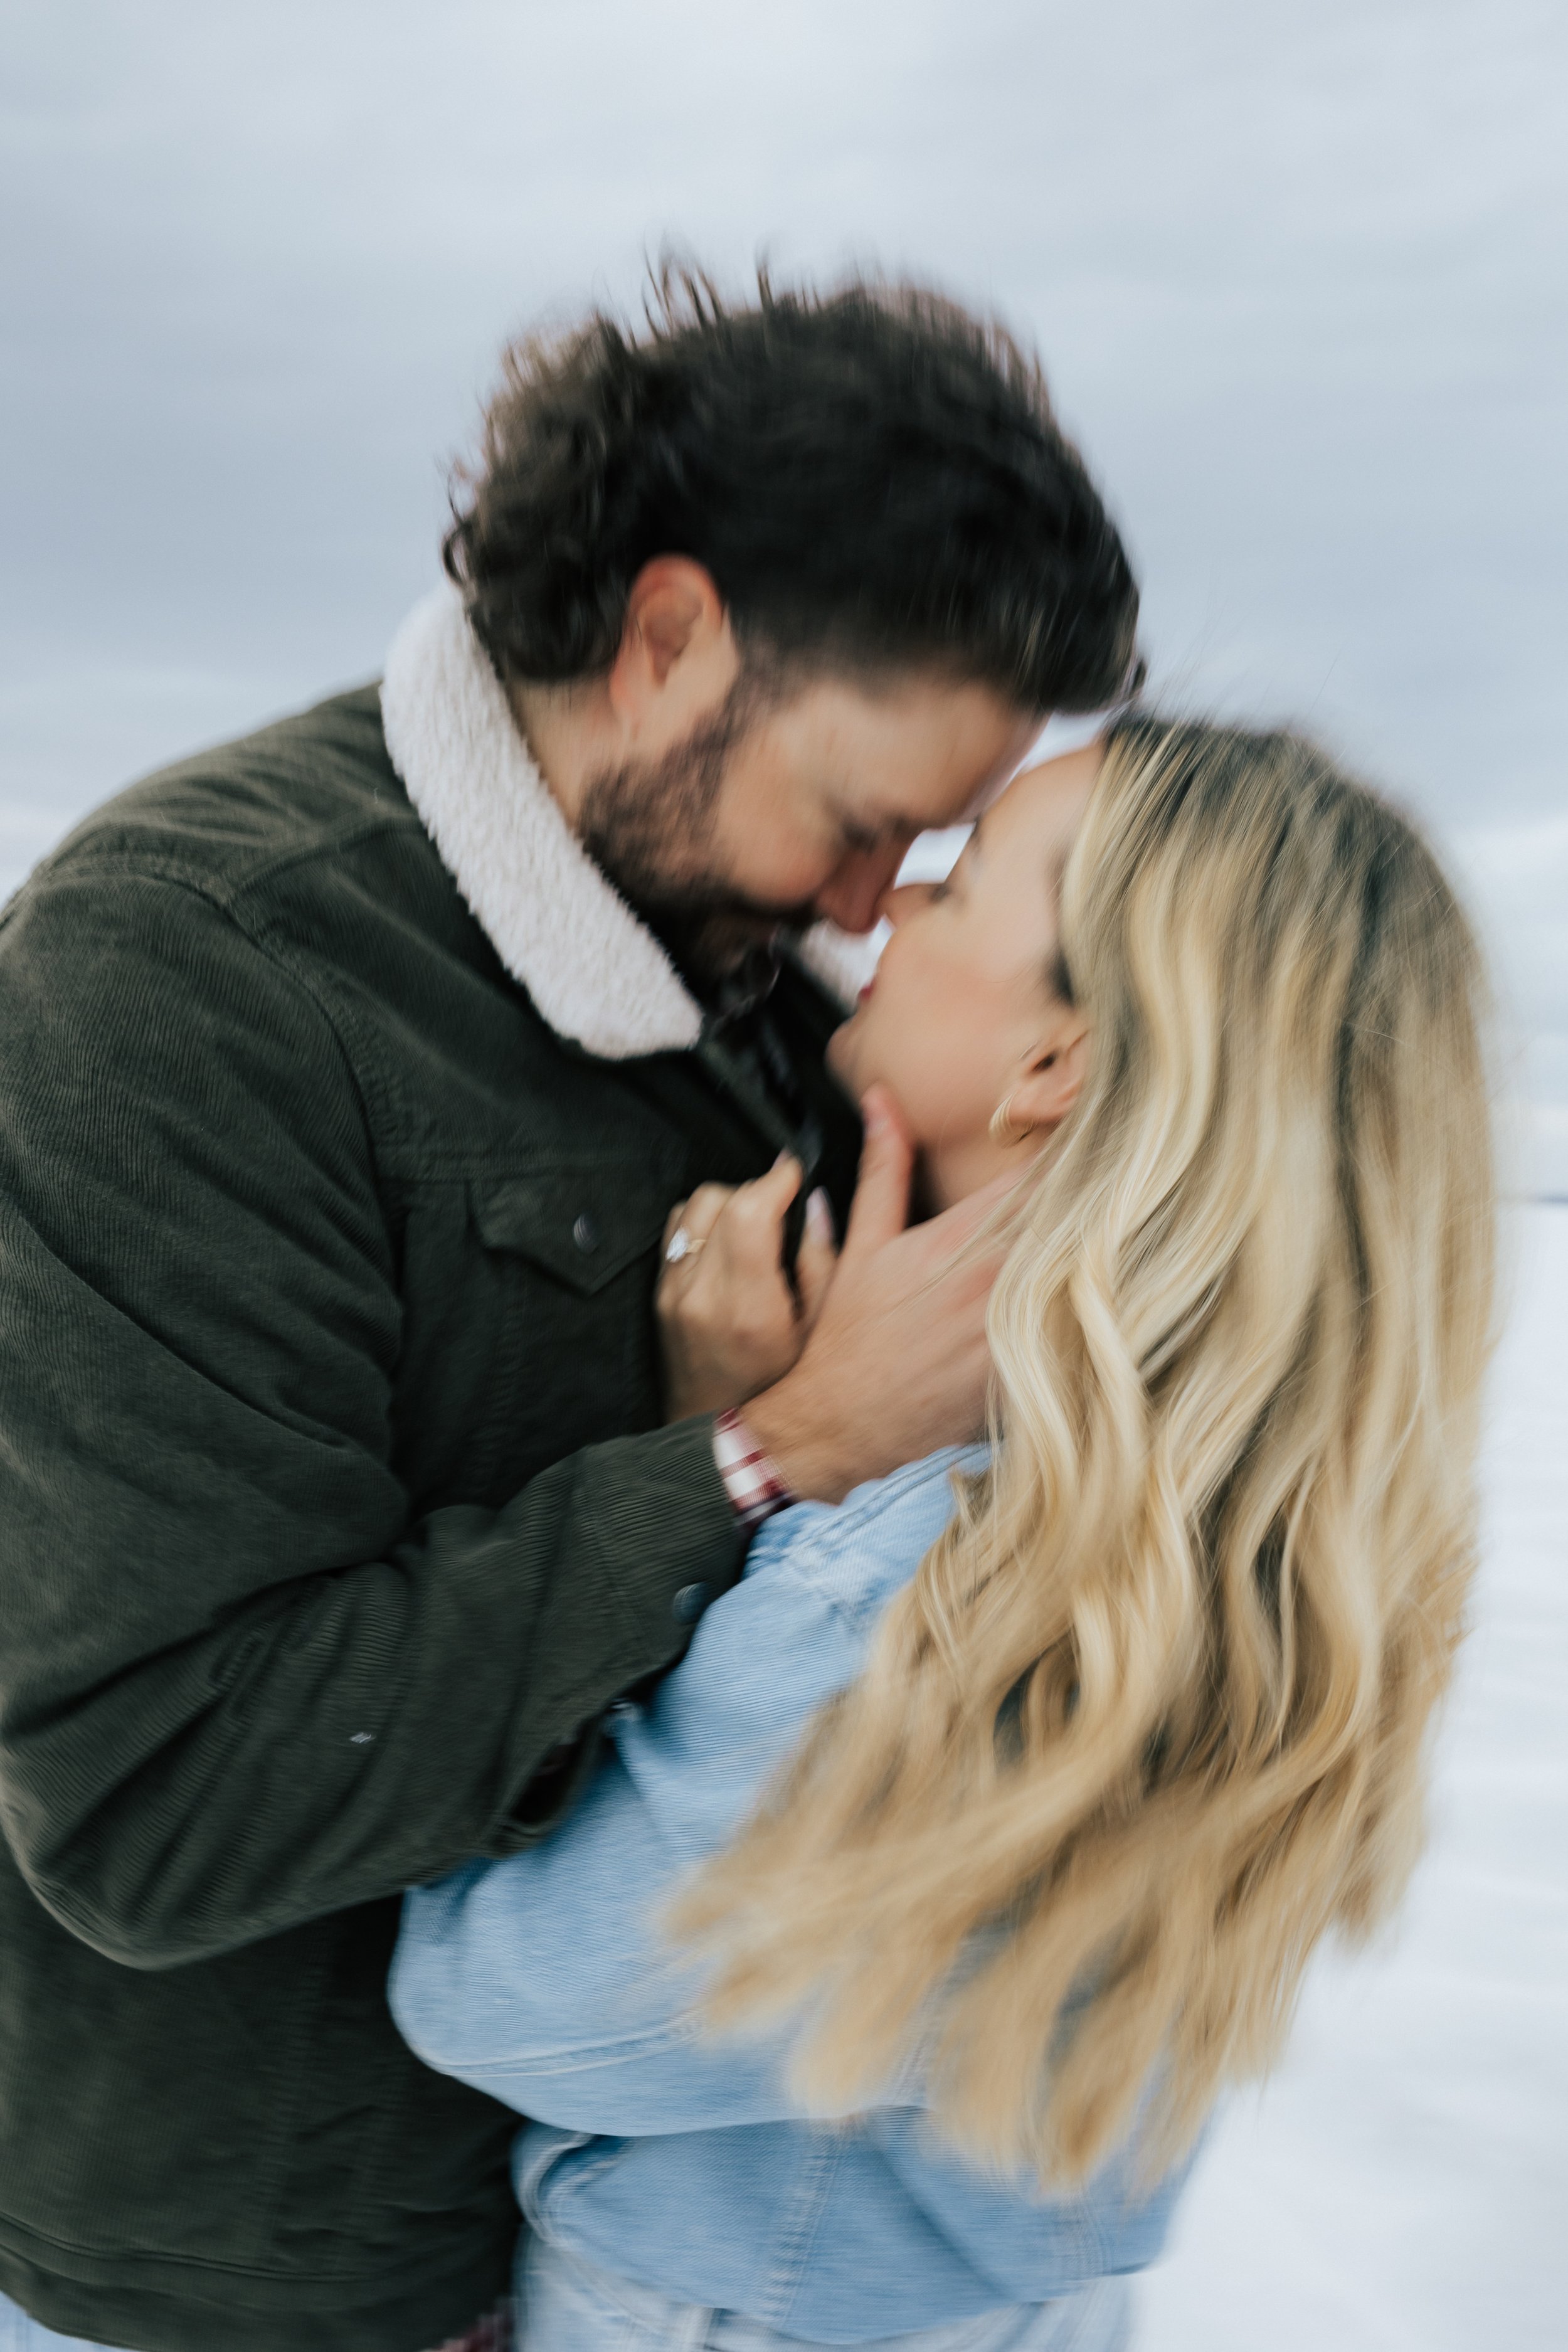  Blurry photo of an engaged couple as they hold each other and hug at the Bonneville Salt Flats near Wendover, Nevada and Salt Lake City, Utah. The Salt Flats are white and the sky is overcast. The mountains show behind. Engagement session at the Uta